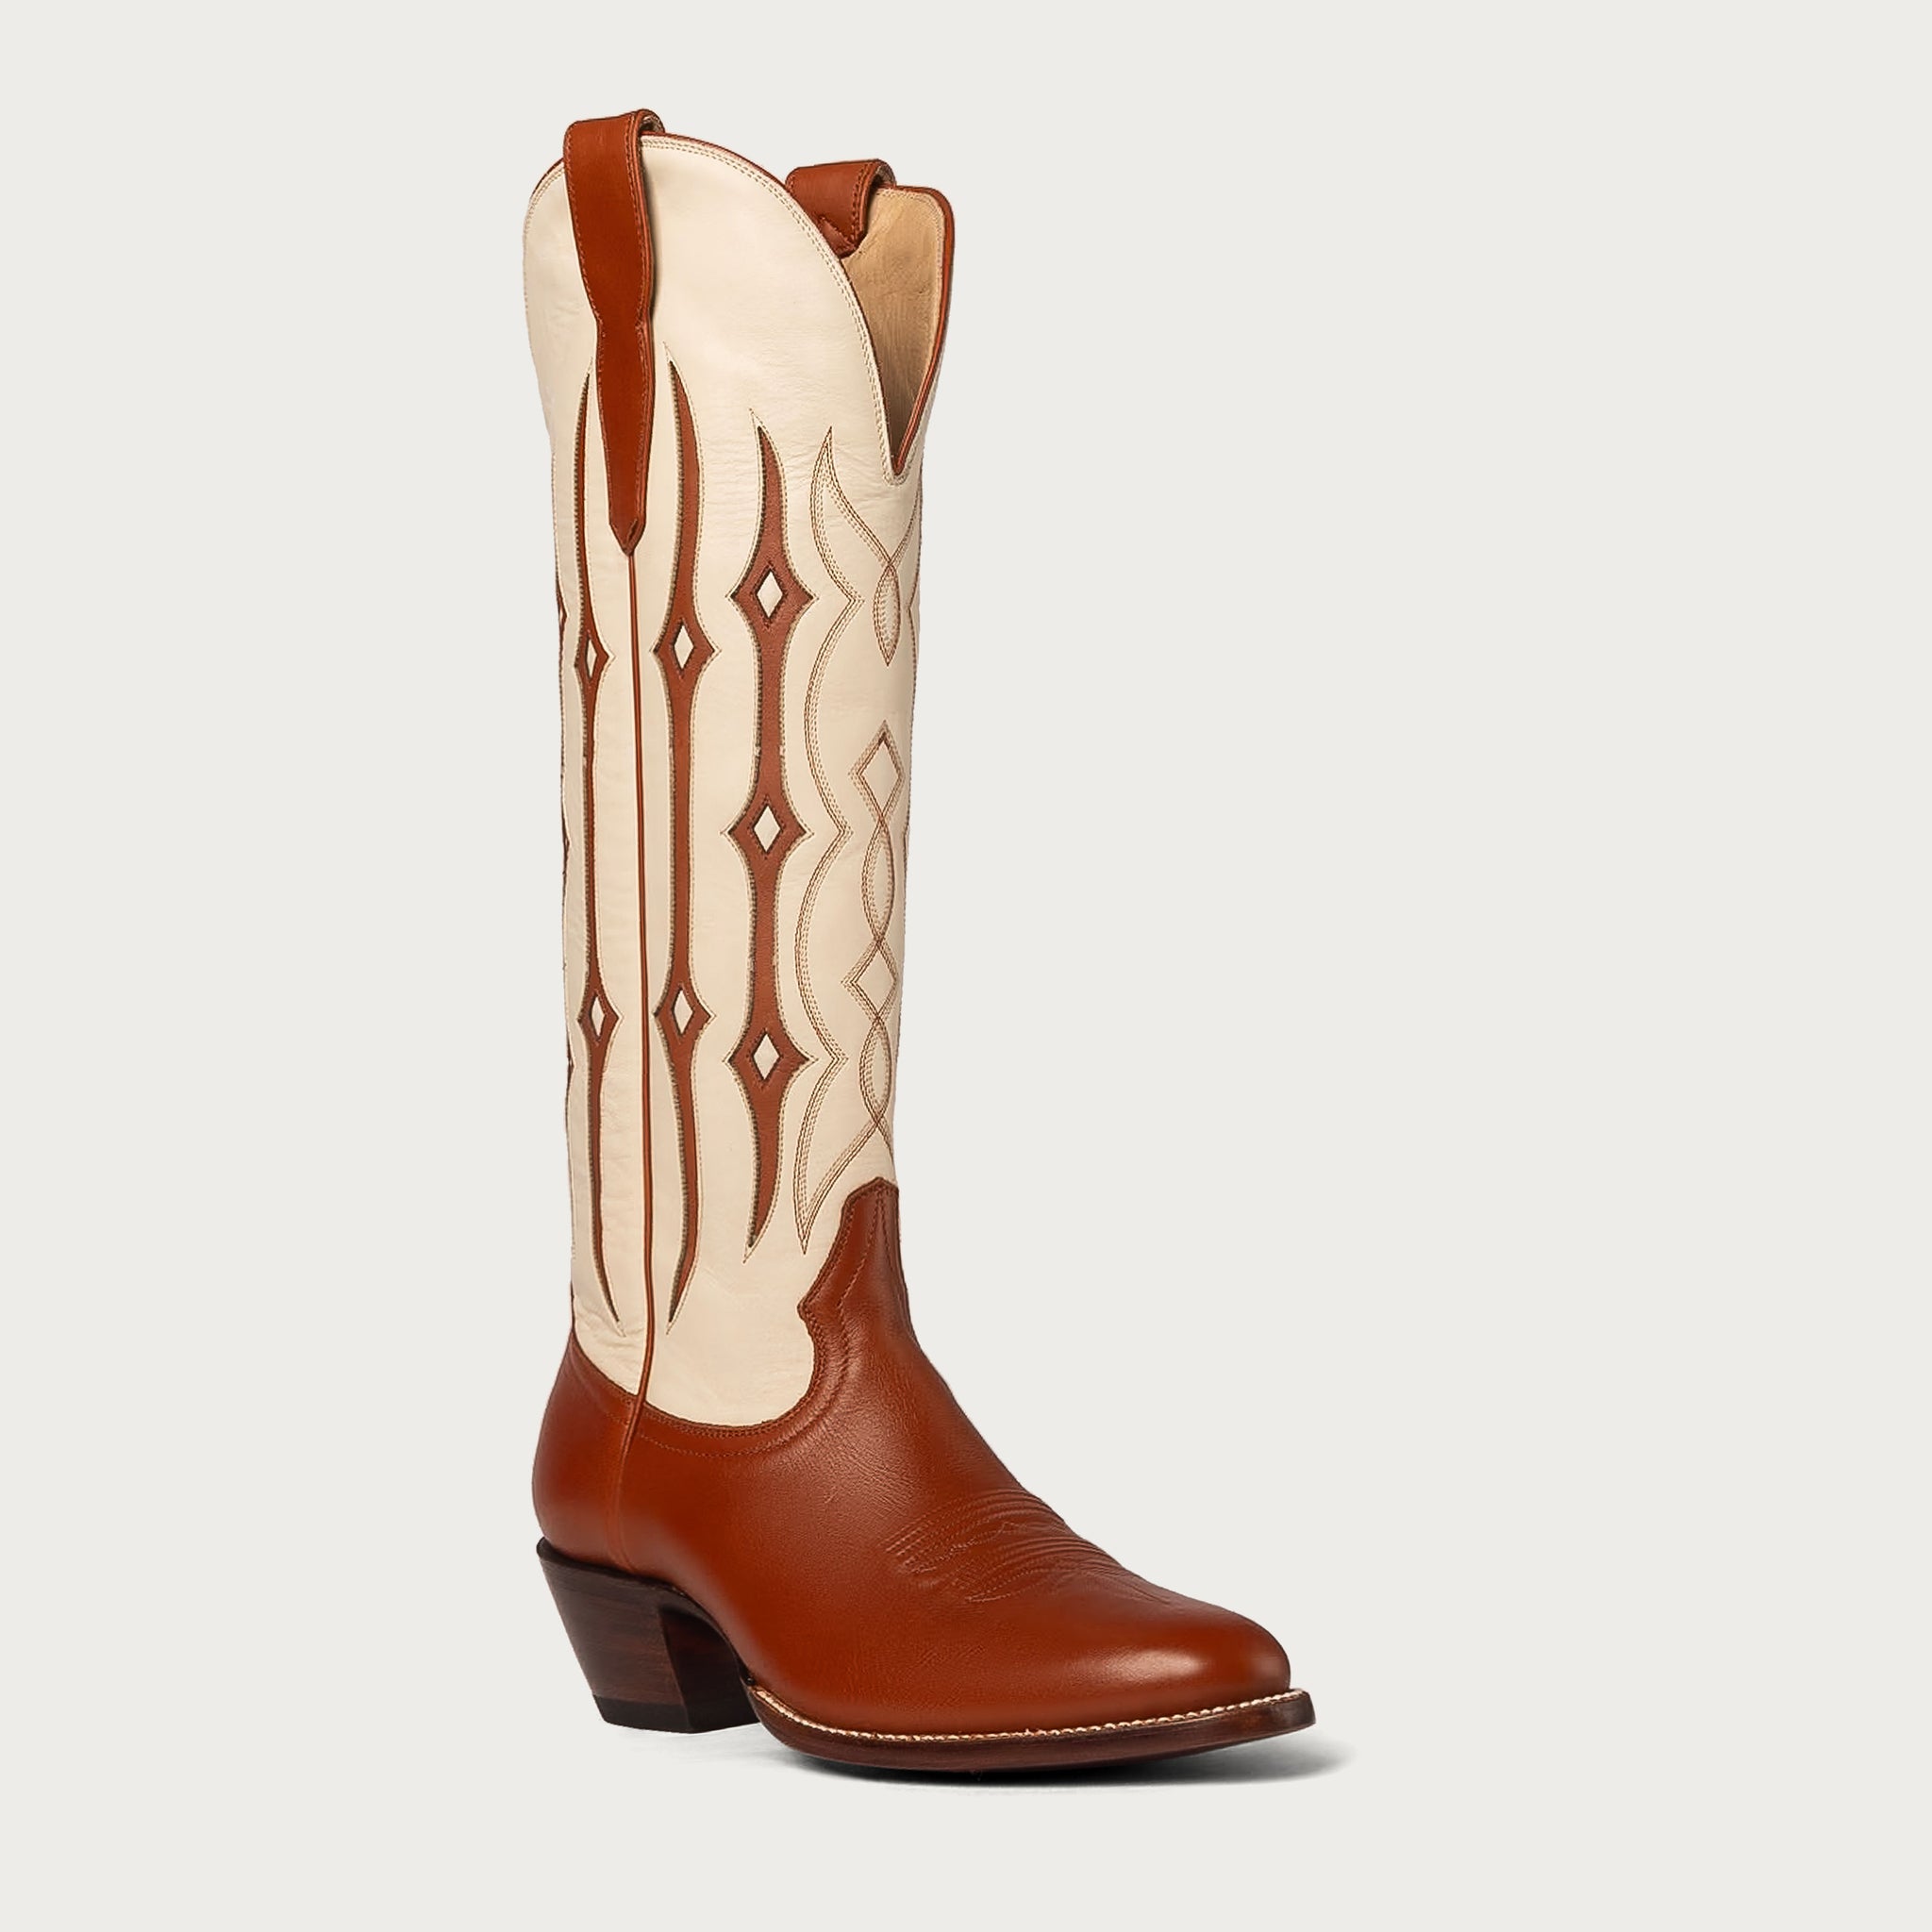 The Guadalupe Boot - CITY Boots